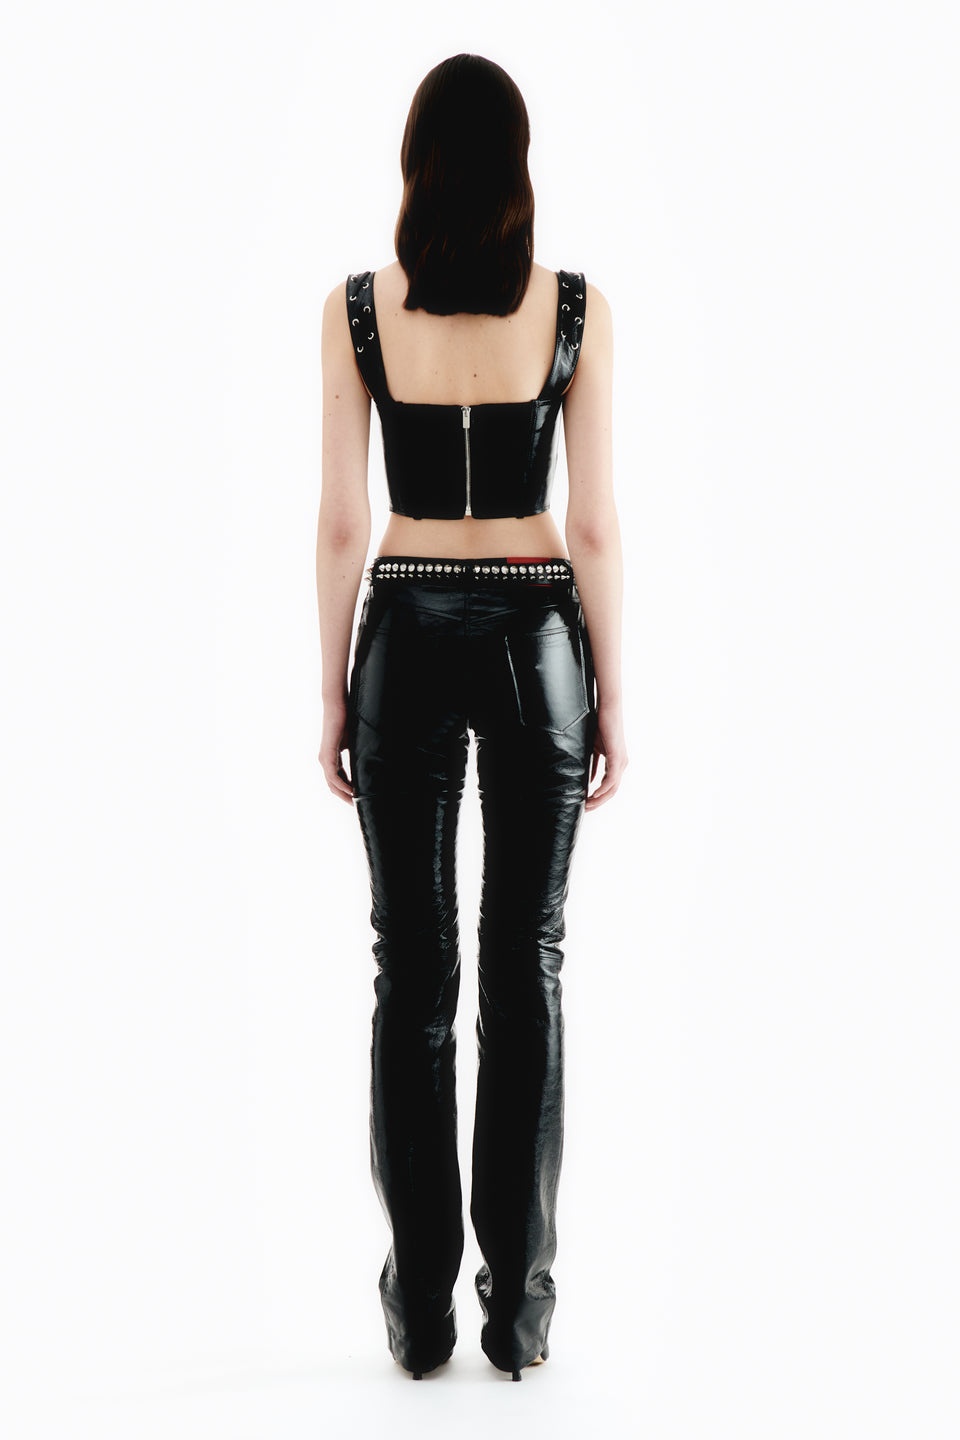 PATENT LEATHER BUSTIER - 4